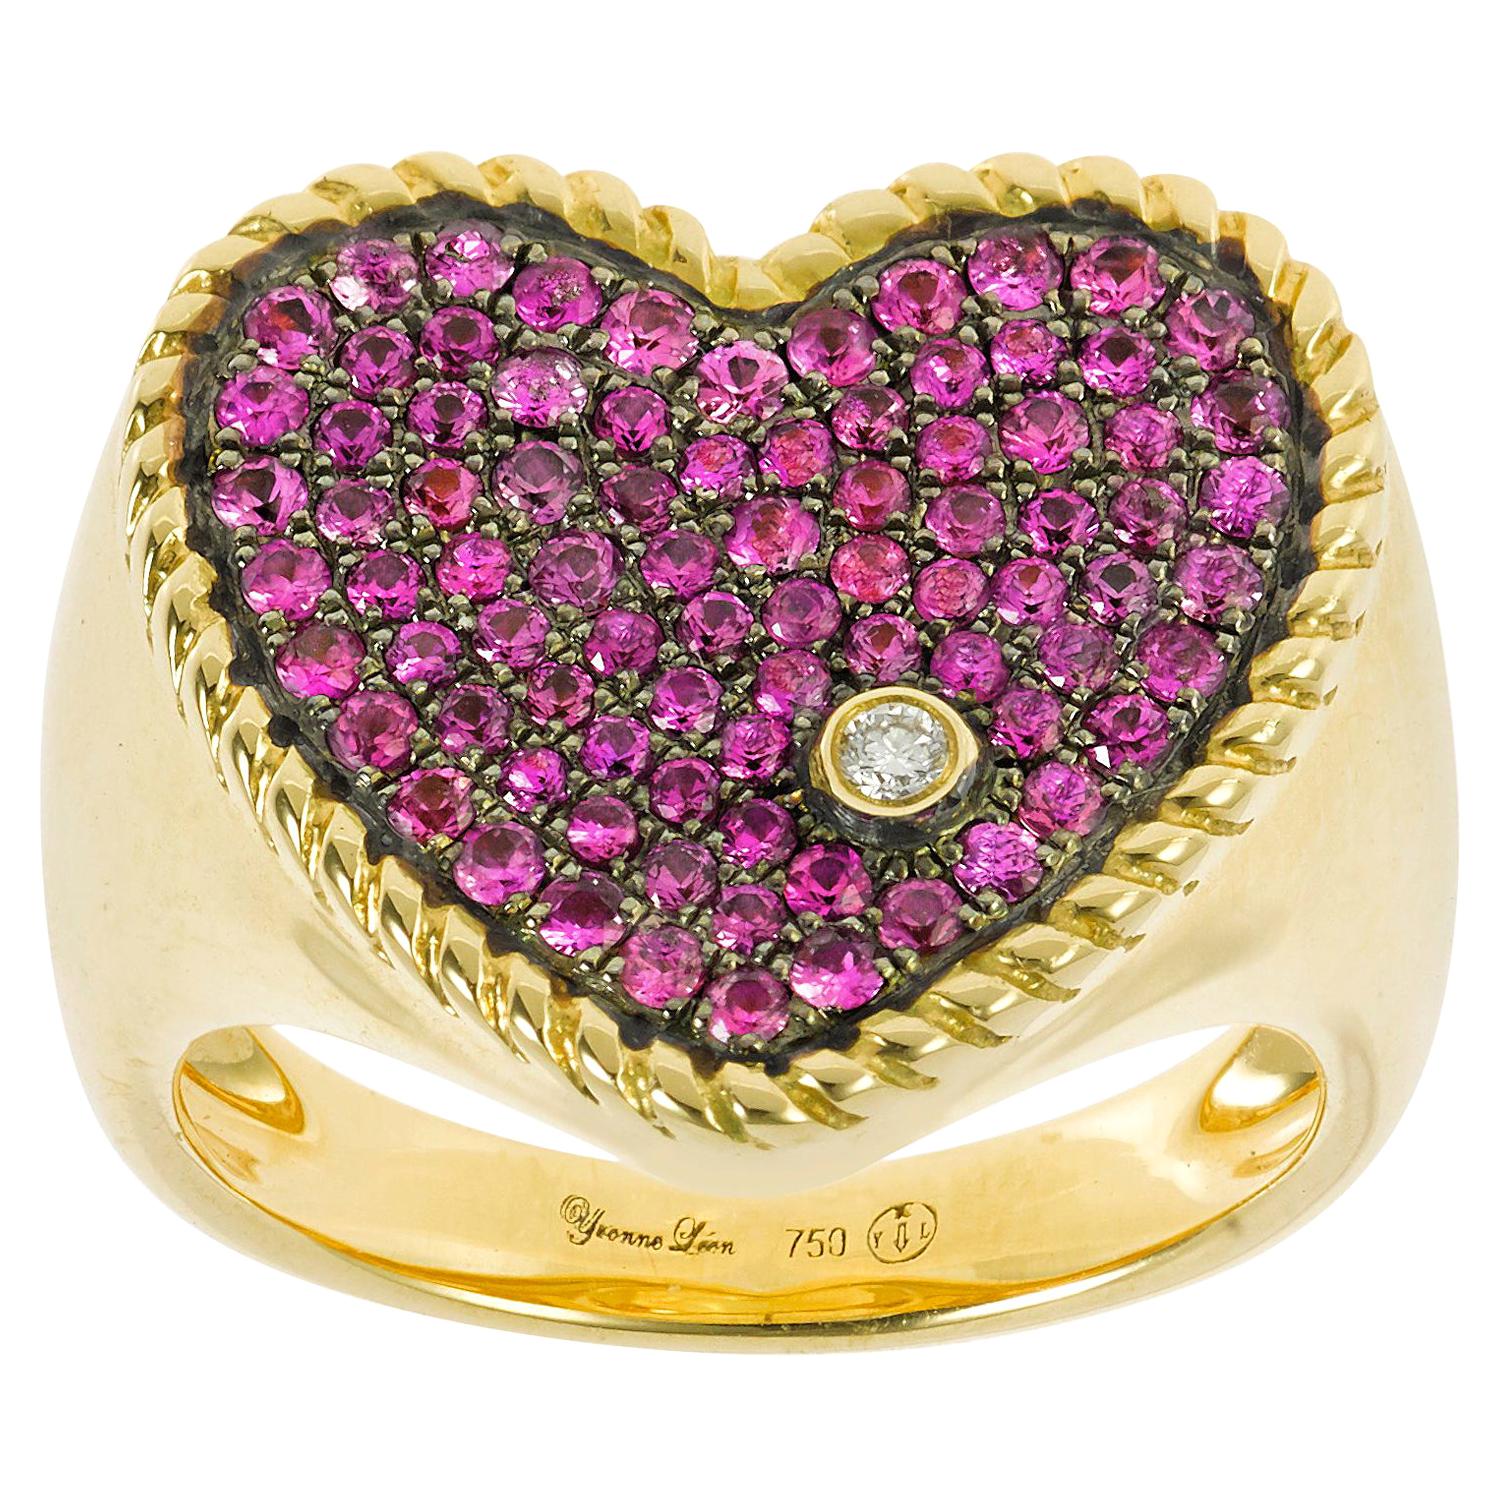 Yvonne Leon's Ring Heart Shape in 18 Karat Yellow Gold and Pink Sapphires For Sale